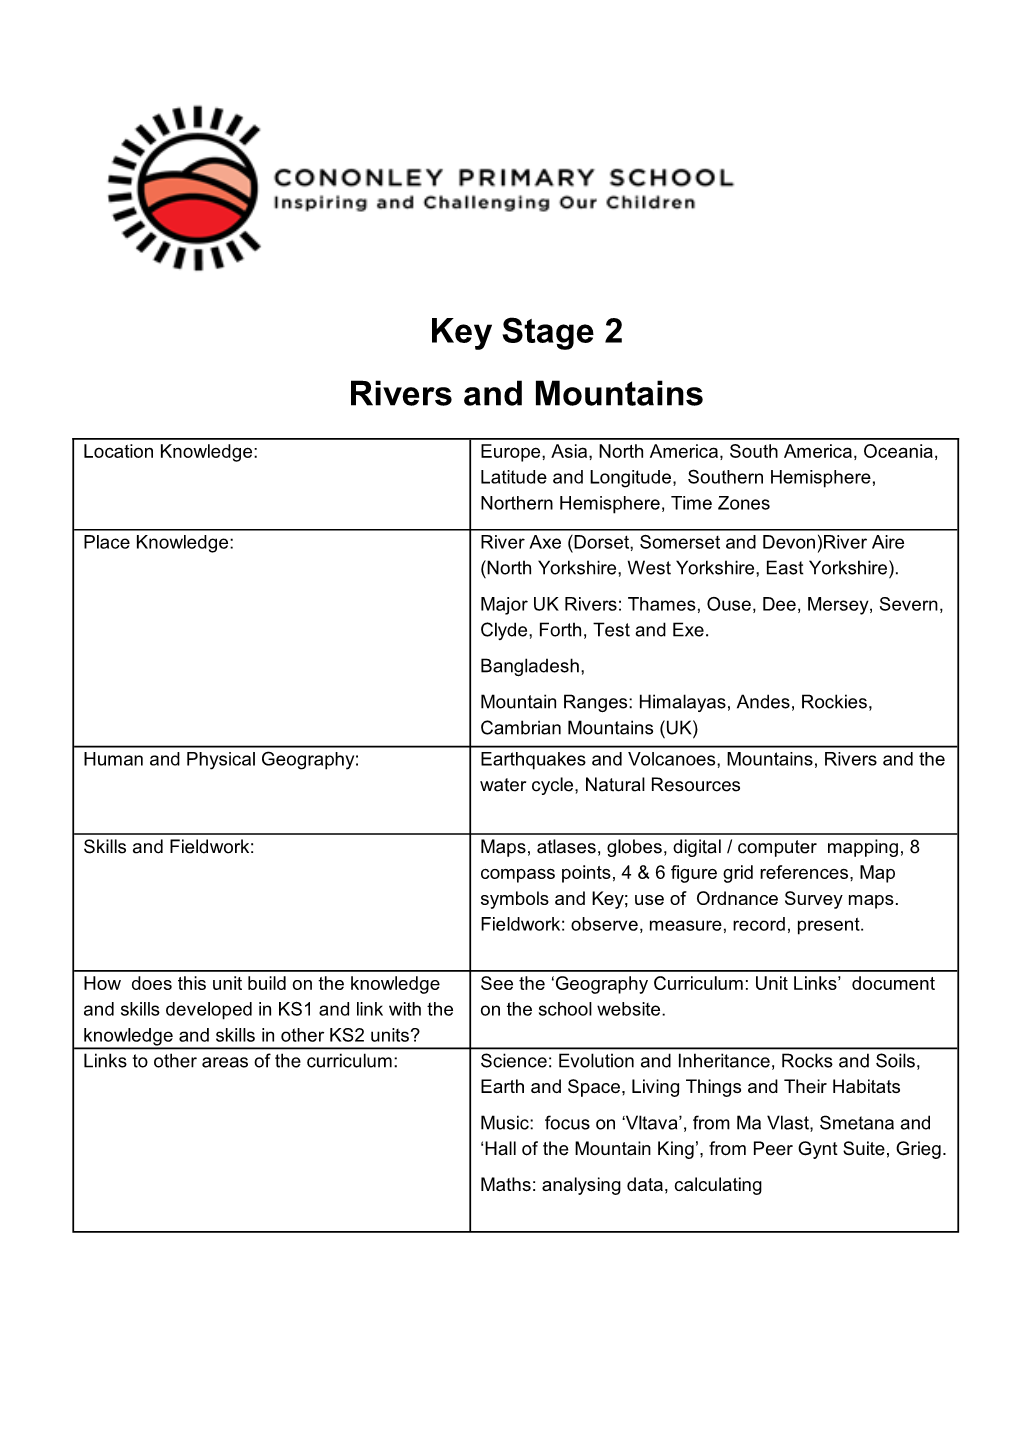 Key Stage 2 Rivers and Mountains